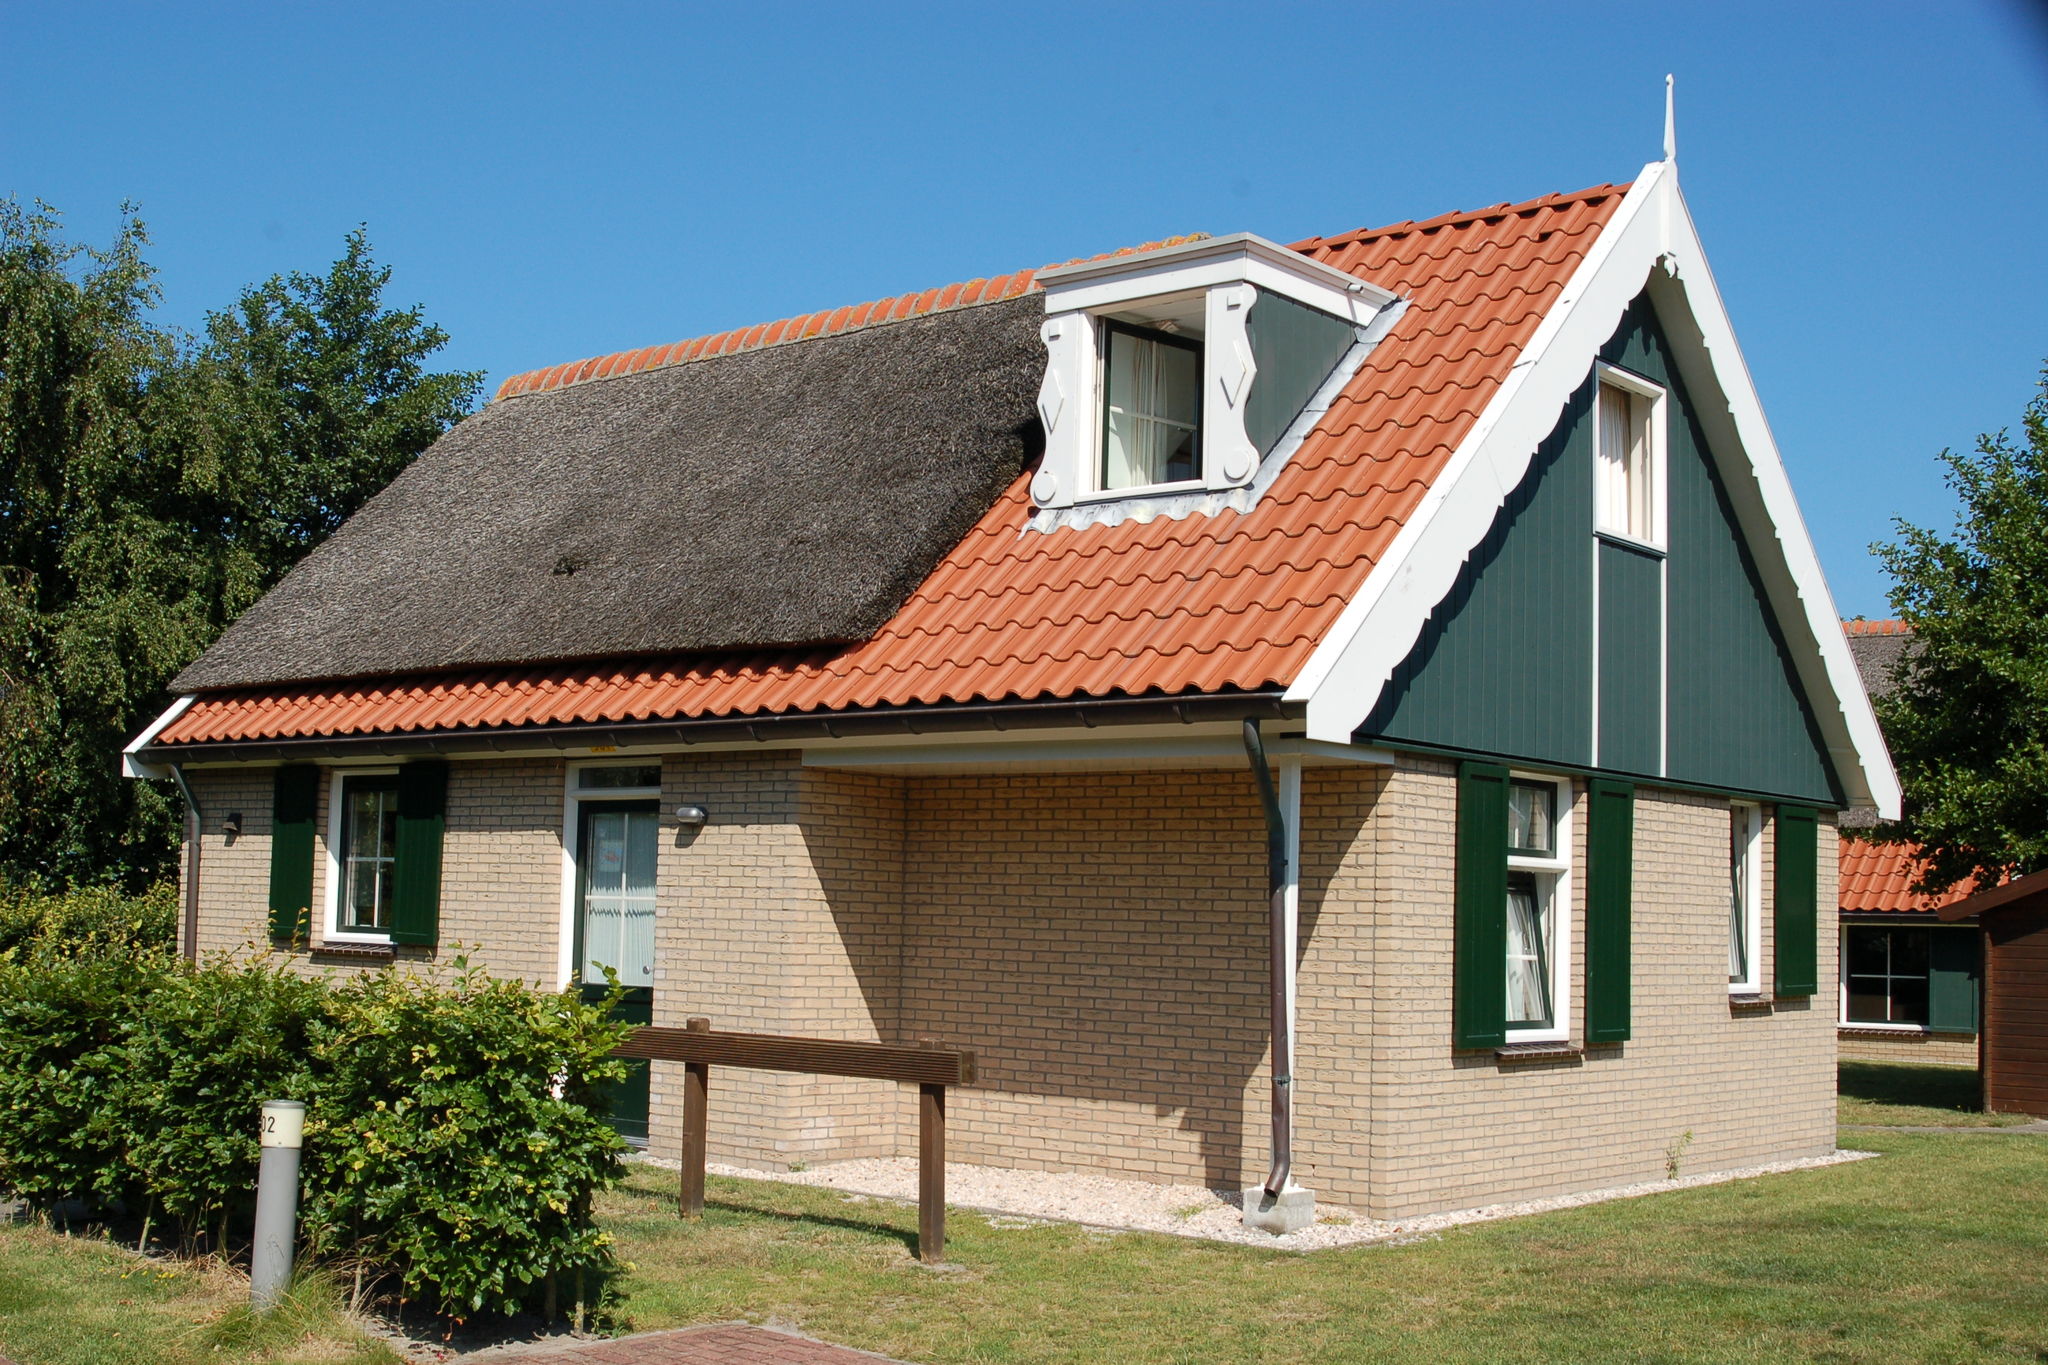 Detached house with dishwasher, 2 km. from the sea on Texel